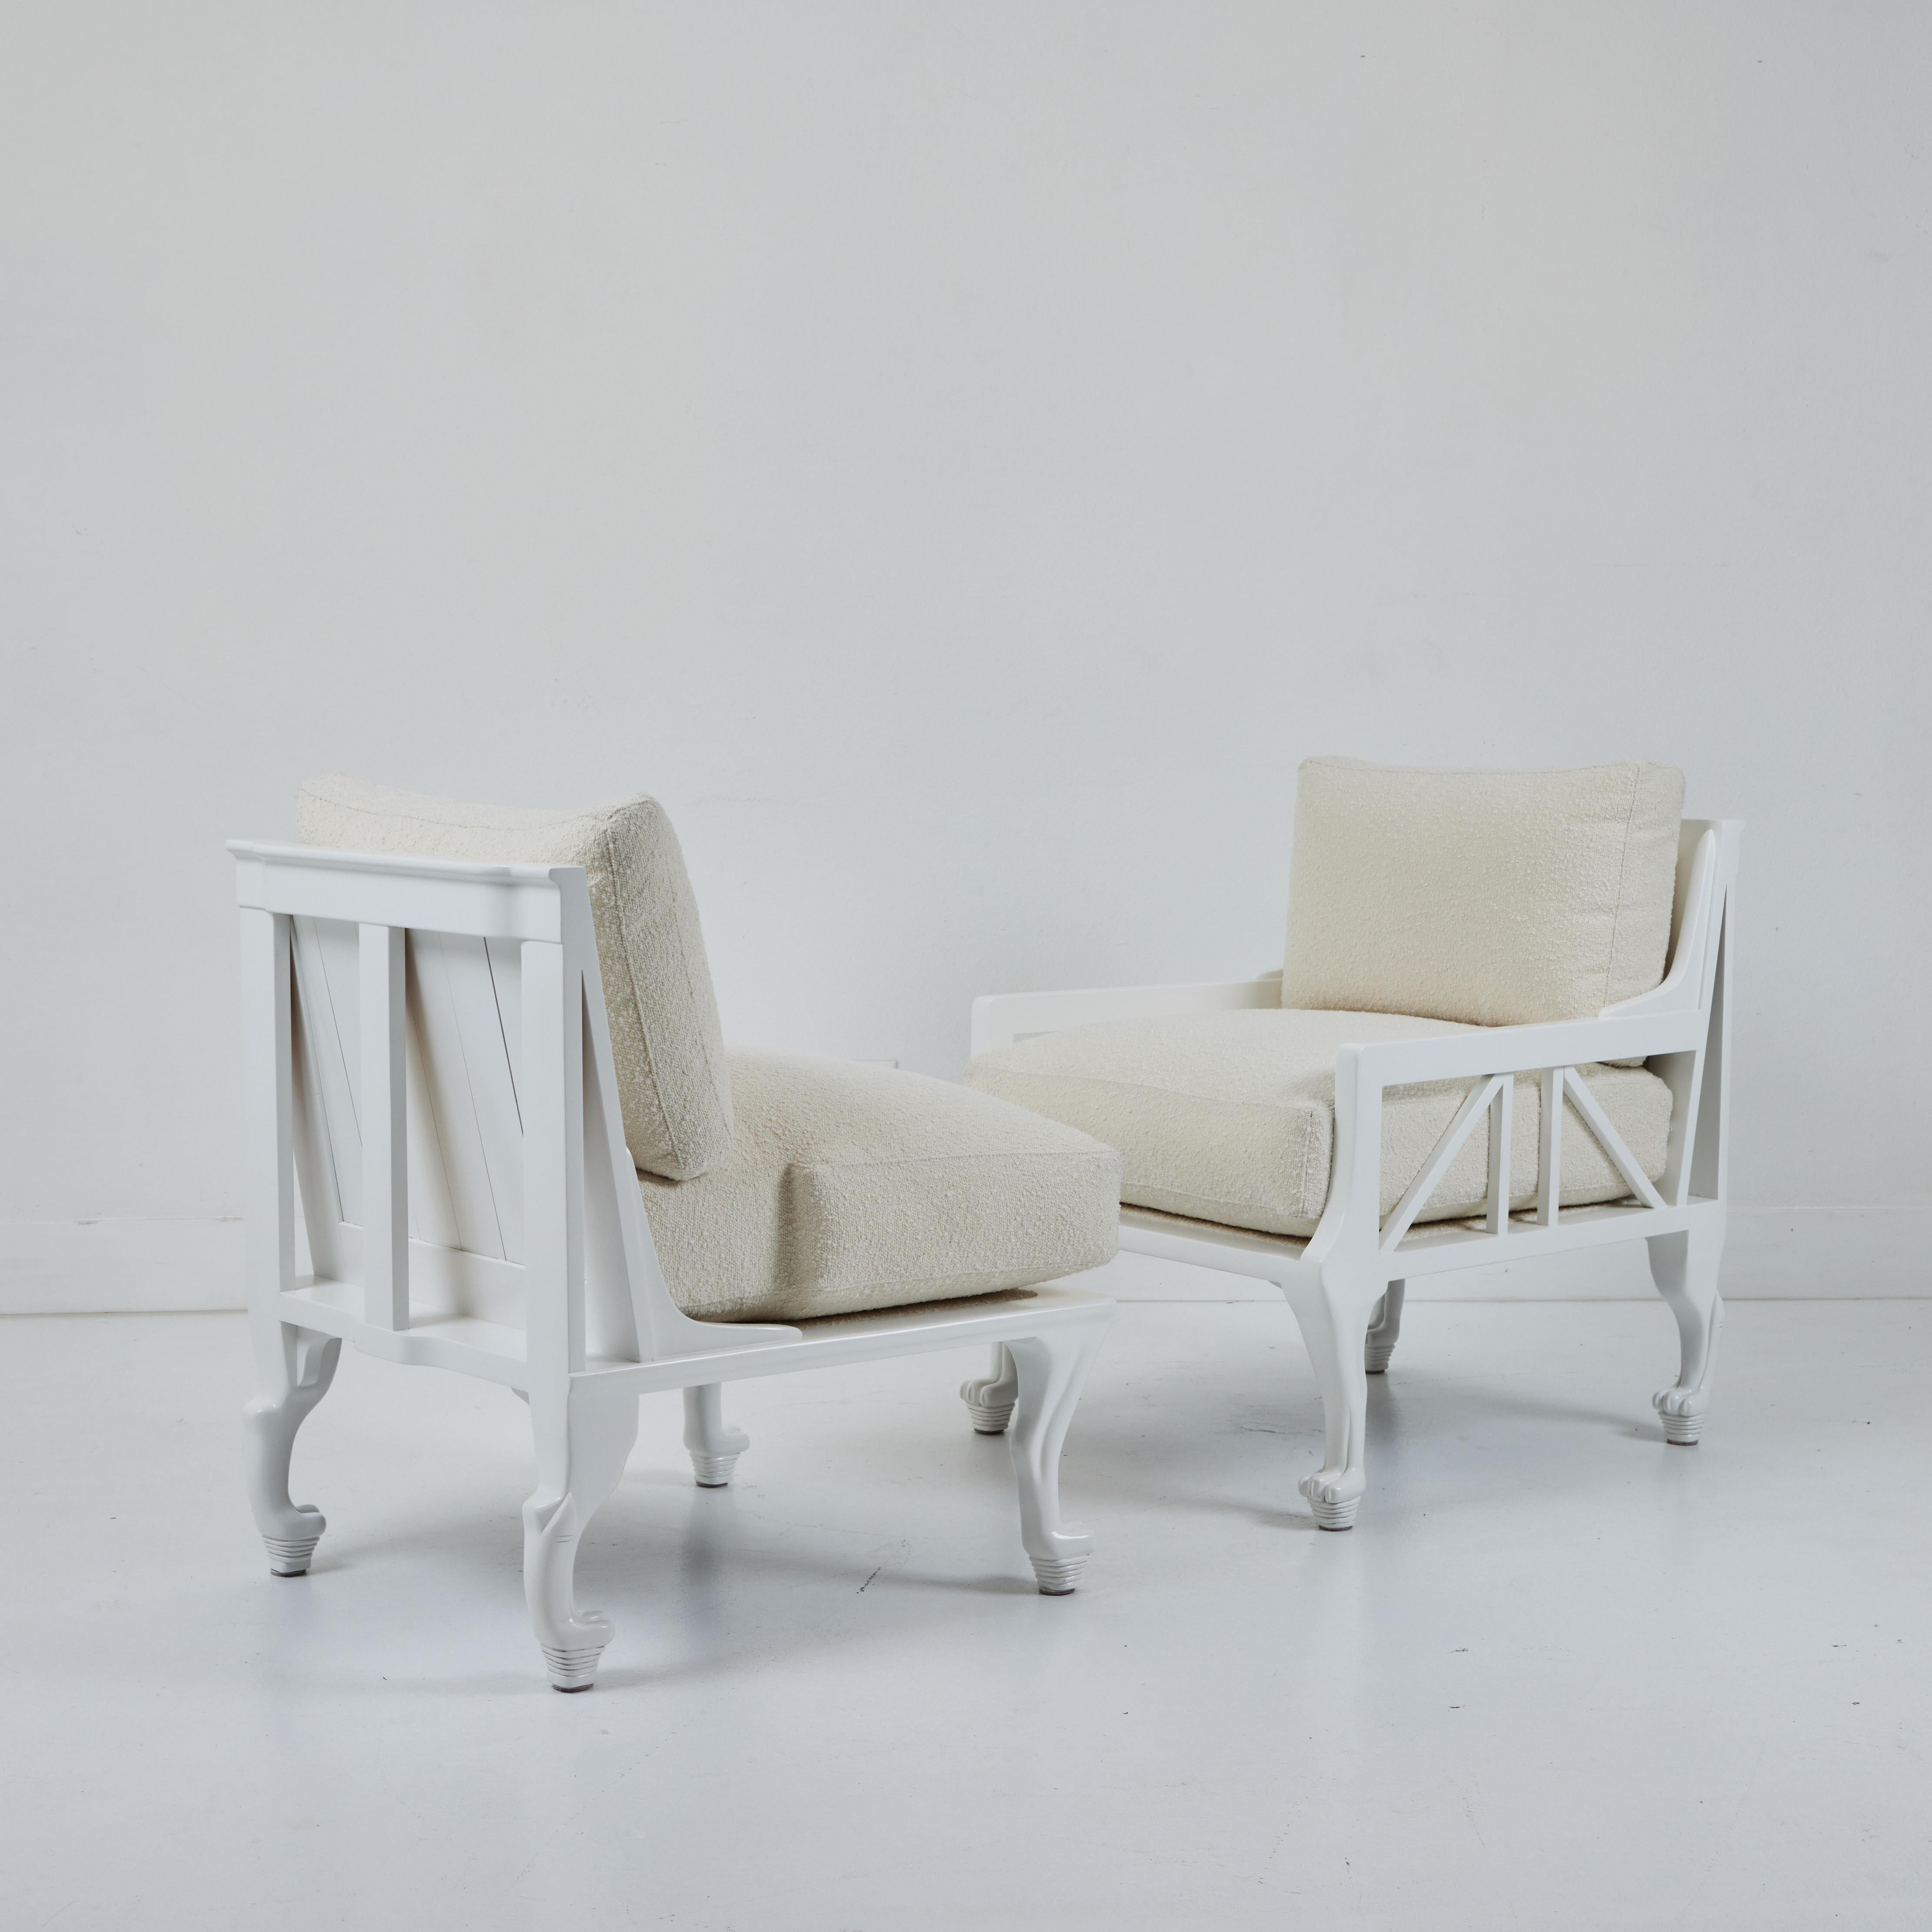 These are 2 wonderfully refinished and reupholstered Thebes chairs by John Hutton for Randolf and Hein. They are not a pair; one is an arm chair while the other is a slipper chair with no arms. They have been reupholstered in a soft cream boucle.